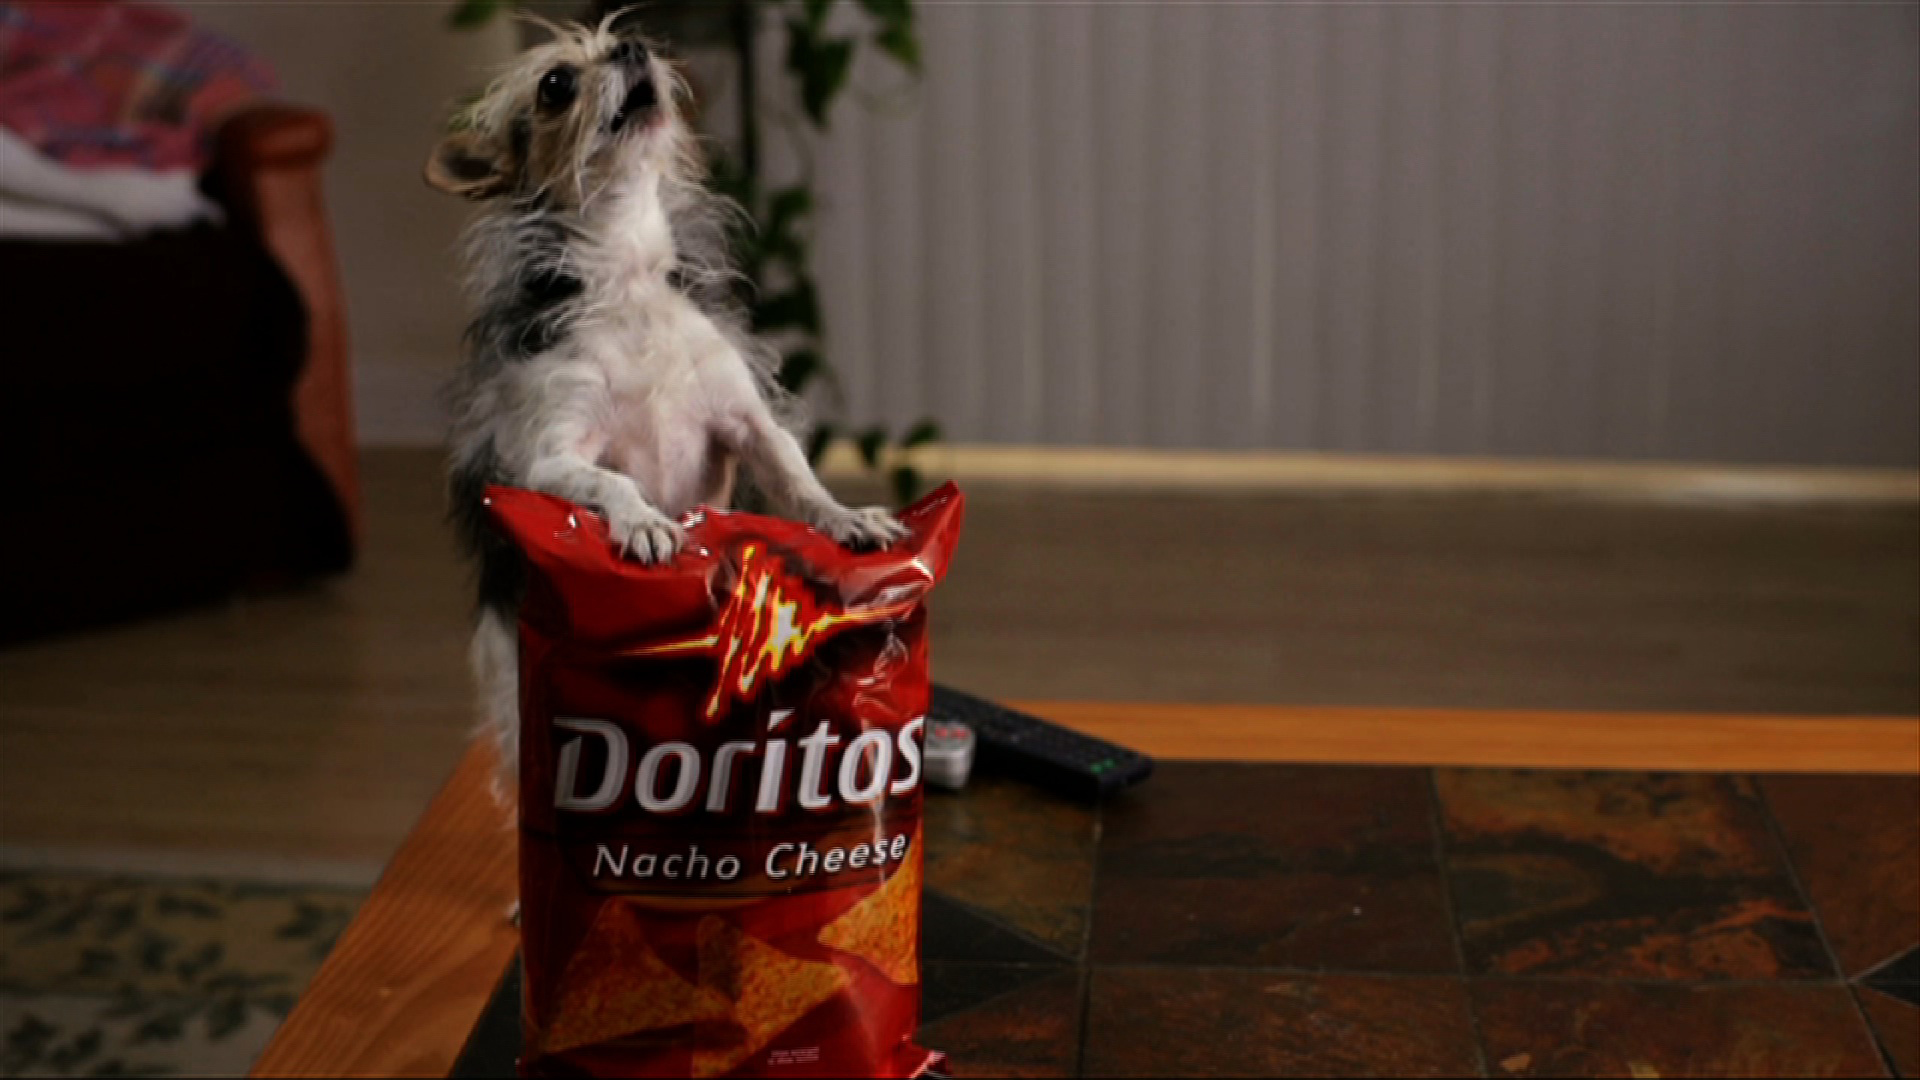 Doritos Girl Ali Landry Announces Finalists Vying For